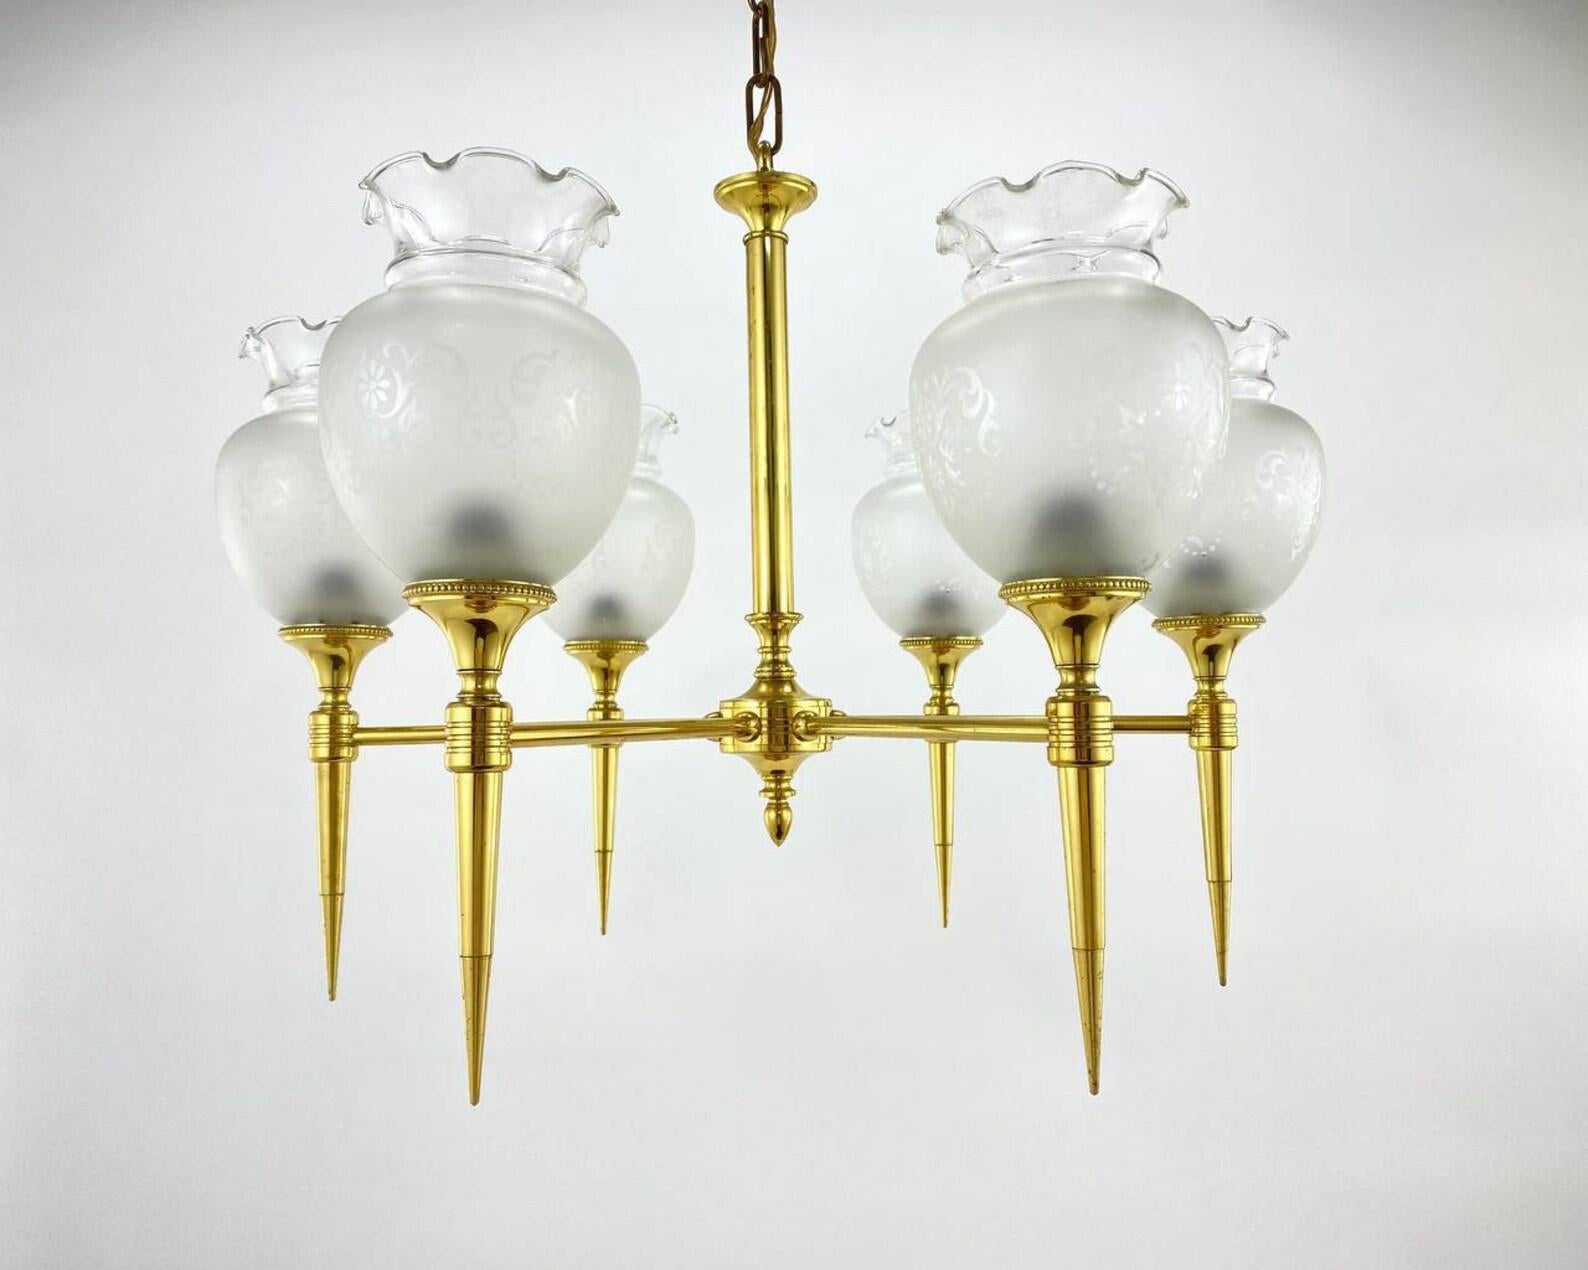 Vintage 6 Light Chandelier Brass and Frosted Glass Ceiling Lamp, France, 1970 For Sale 3